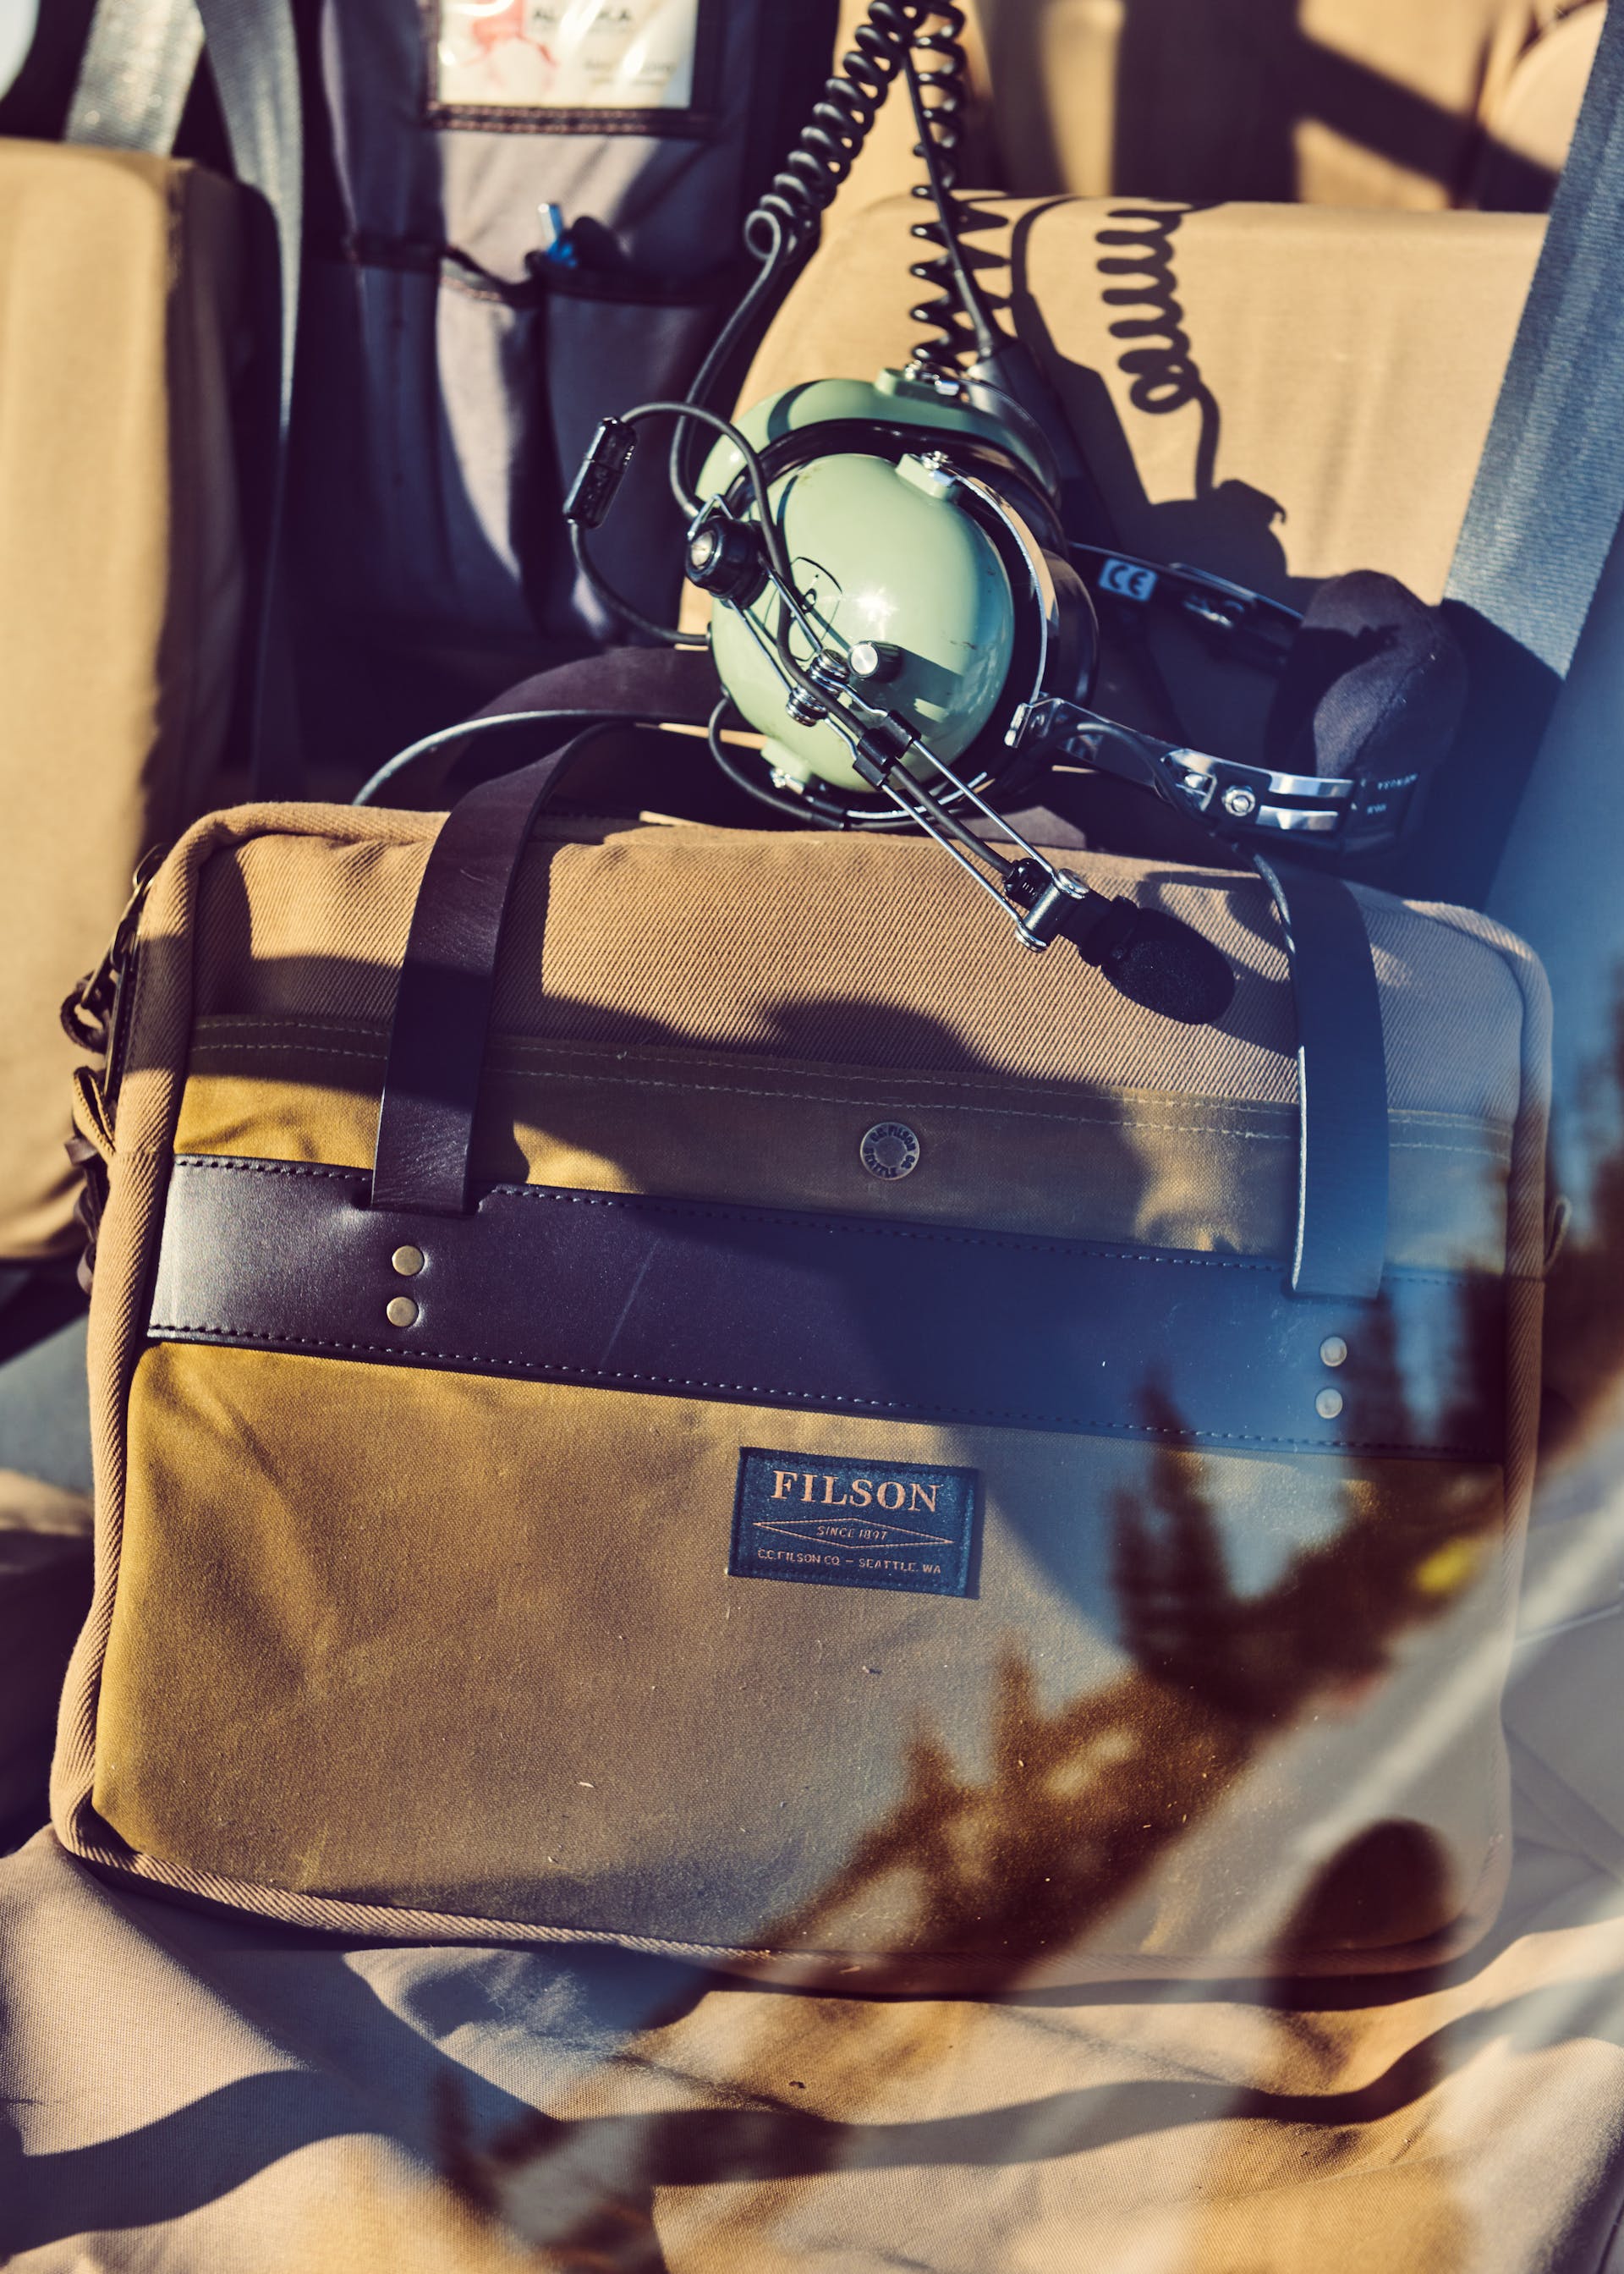 Filson Rugged Twill Compact Briefcase in sportsman tan resting on a helicopter seat